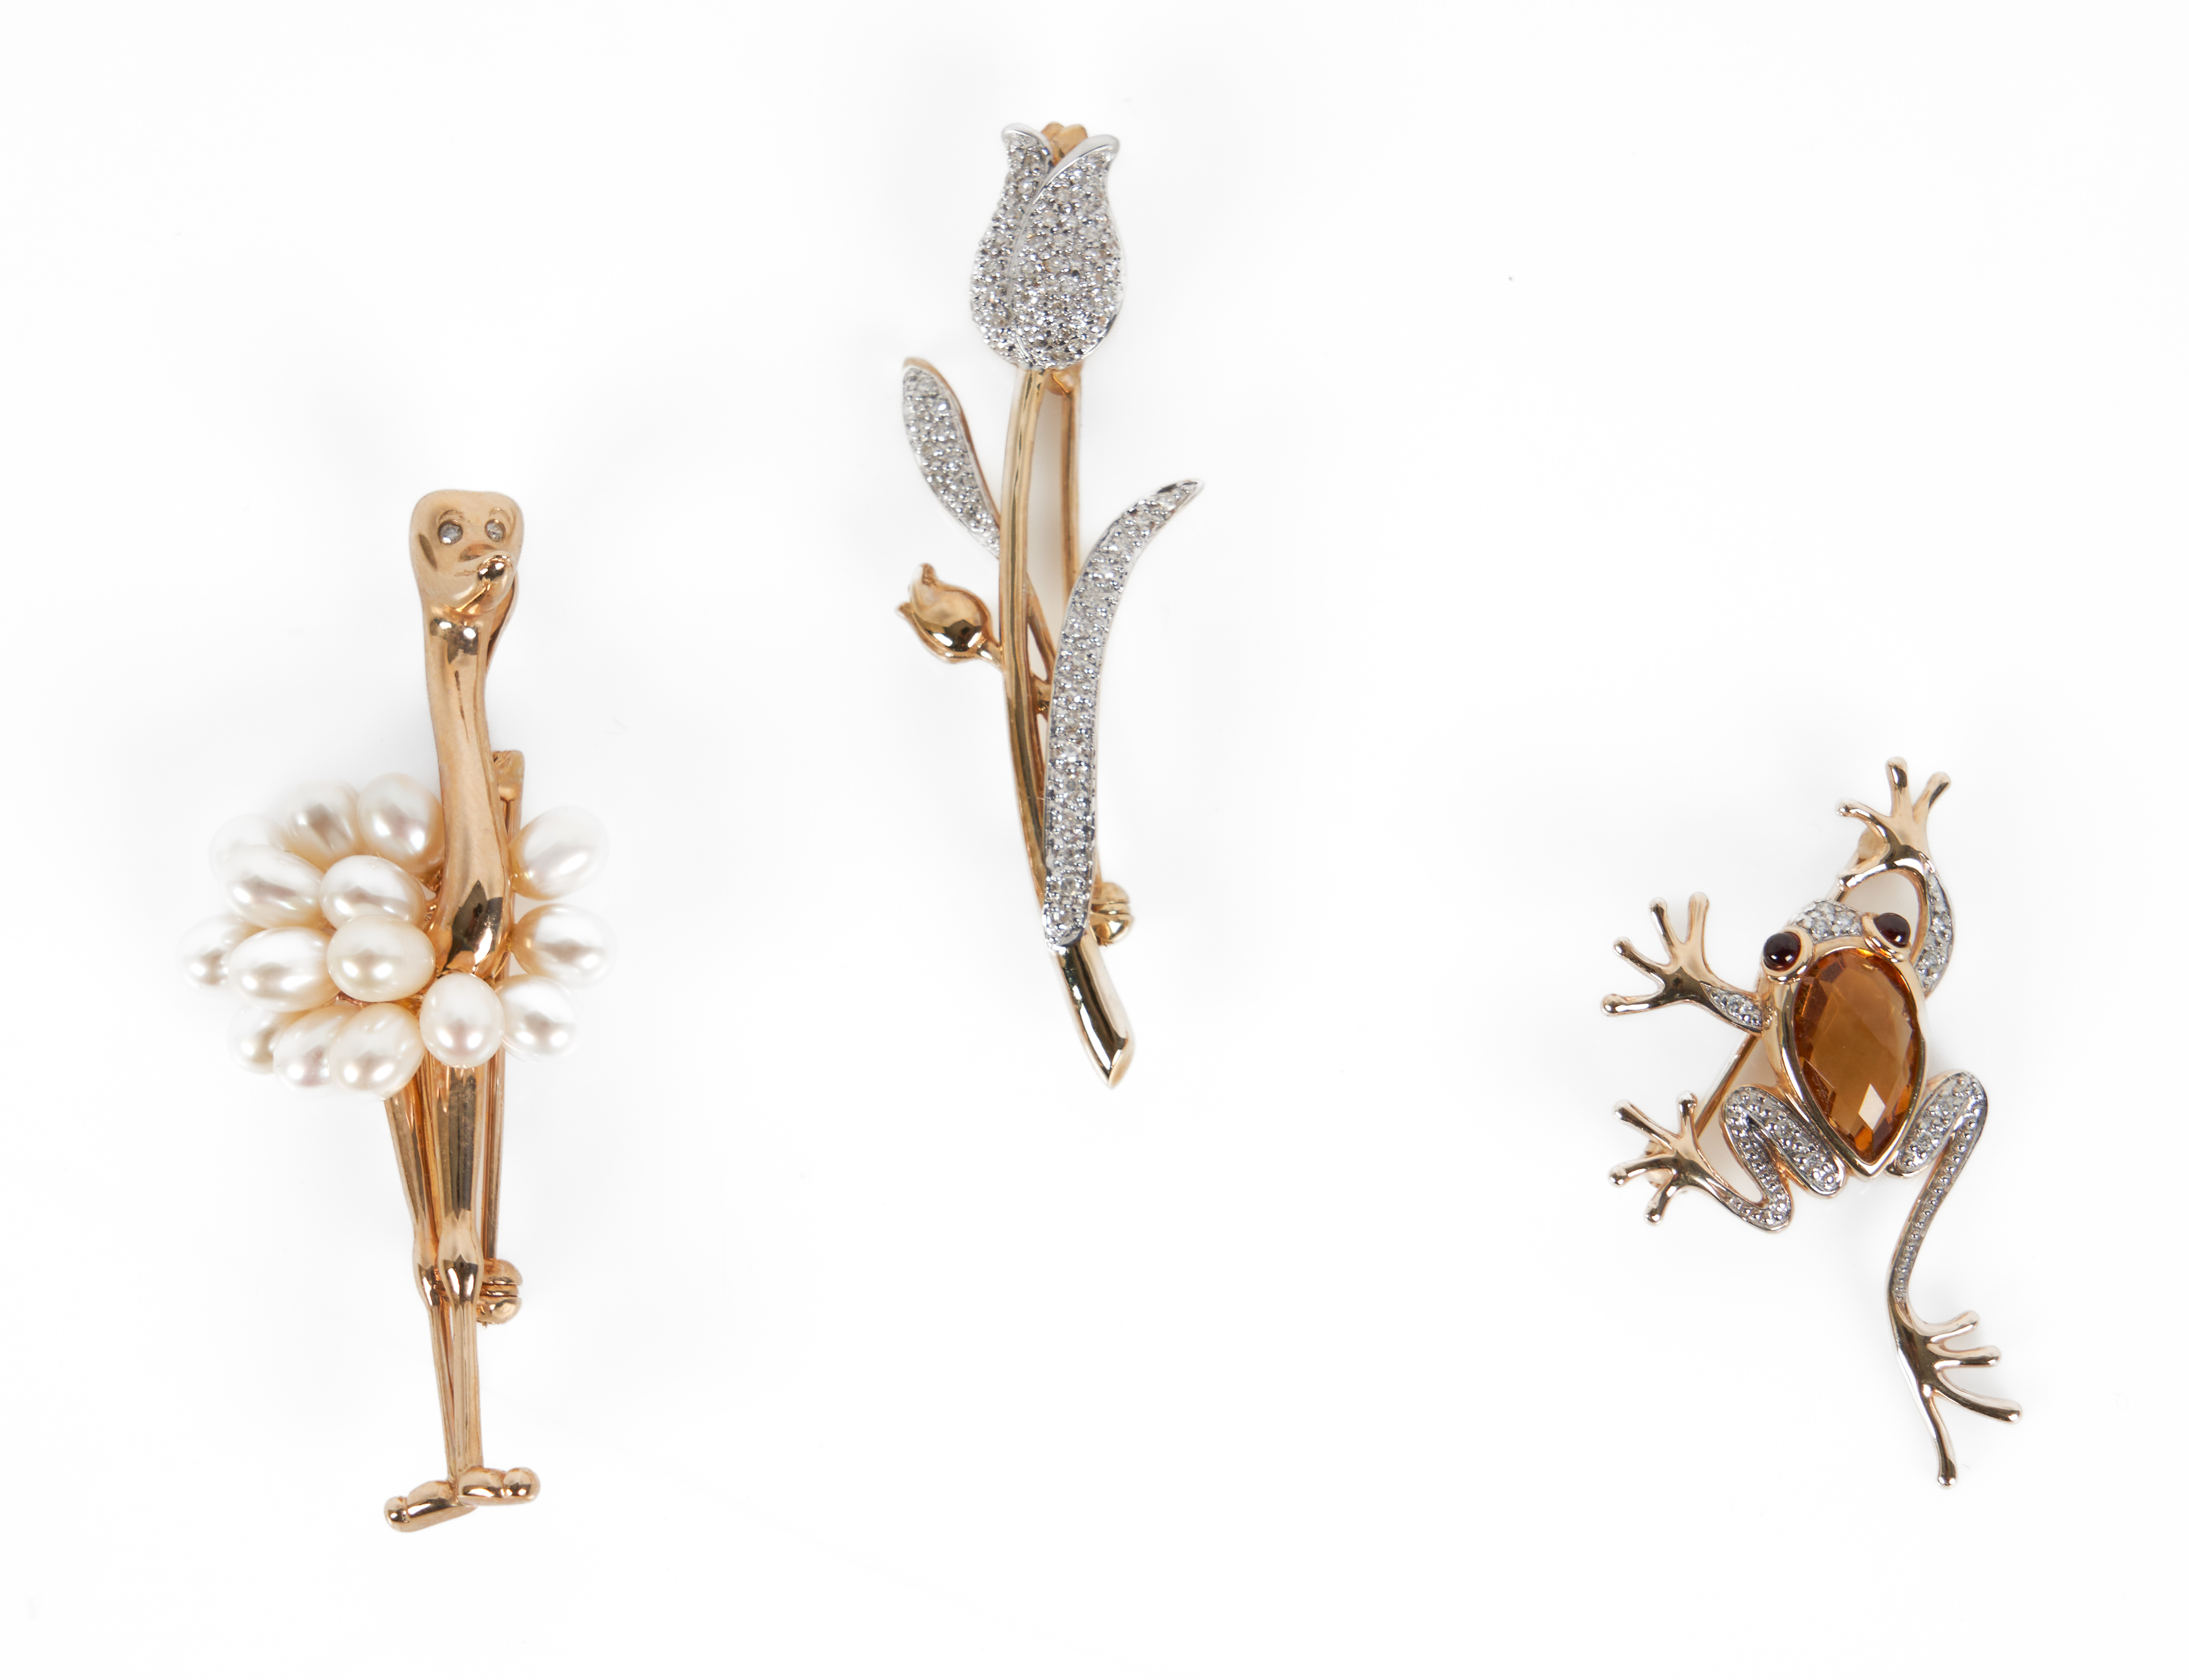  3 14K Yellow gold figural brooches 2e21be